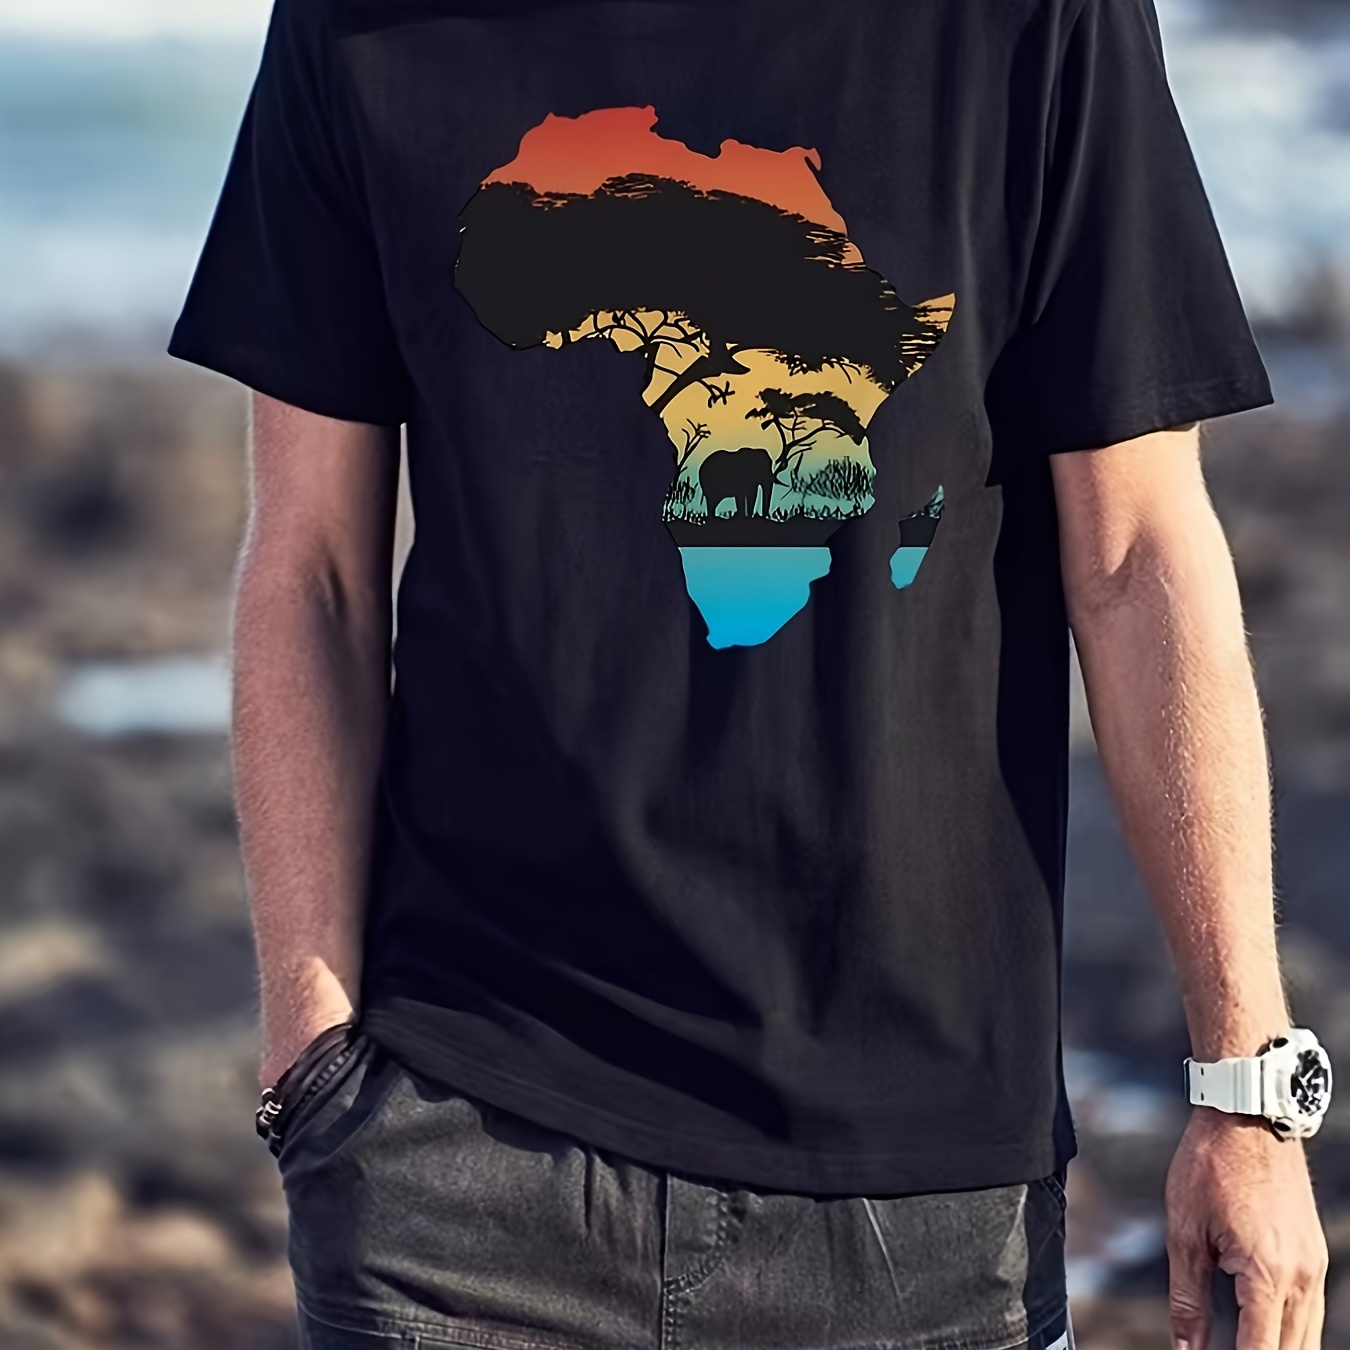 

African Map Print, Men's Round Crew Neck Short Sleeve, Simple Style Tee Fashion Regular Fit T-shirt Casual Comfy Top For Spring Summer Holiday Leisure Vacation Men's Clothing As Gift